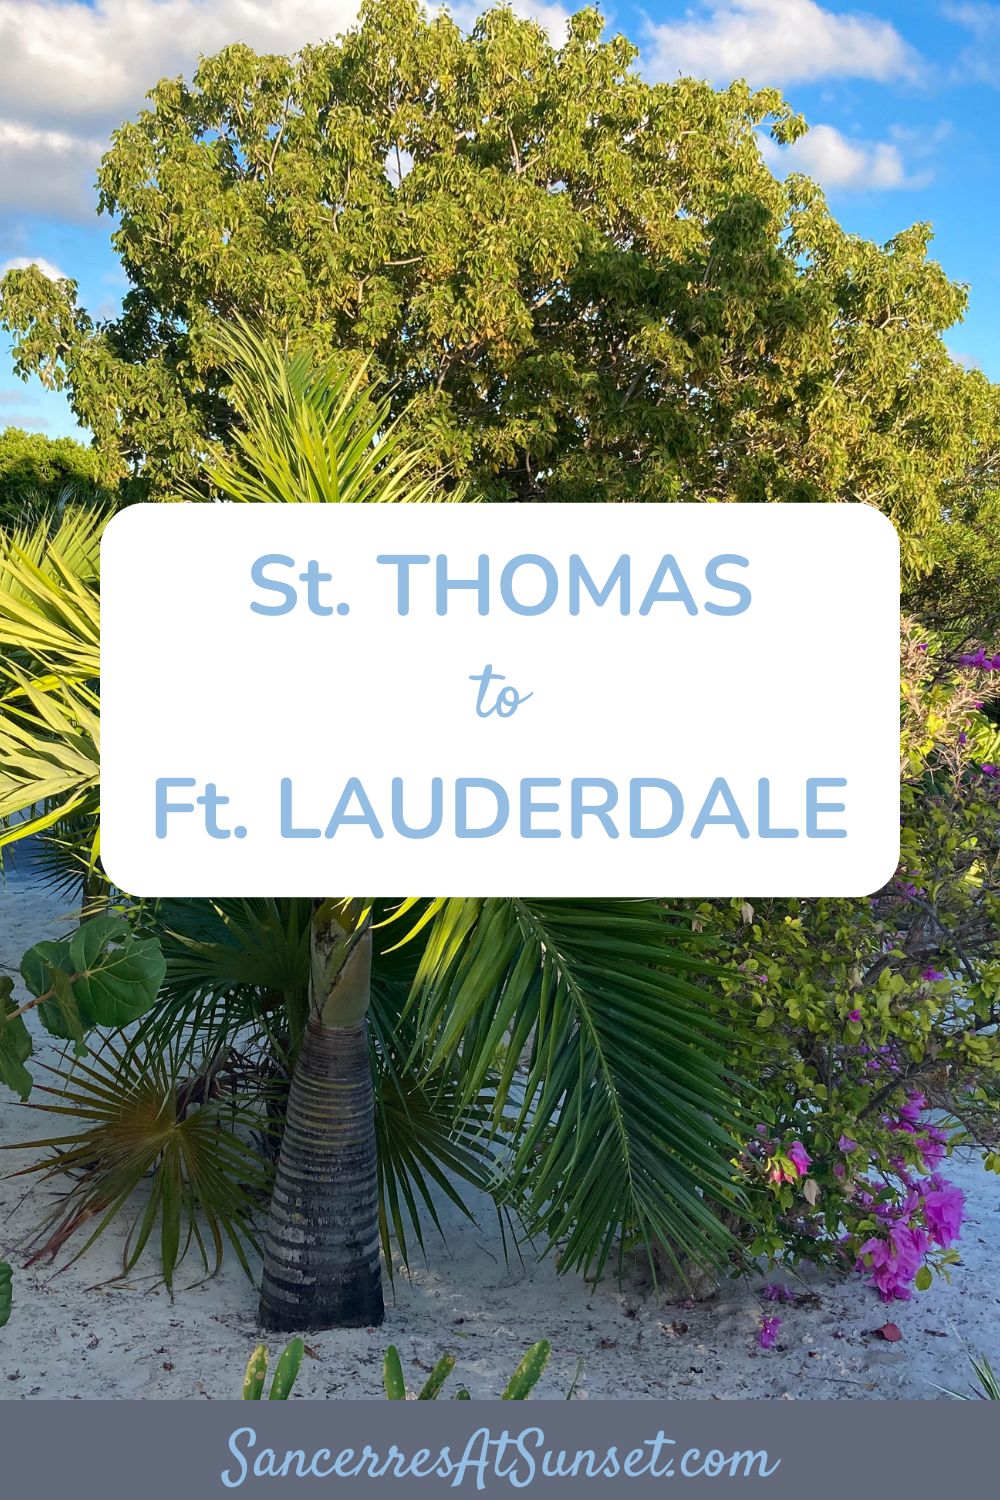 St. Thomas to Fort Lauderdale